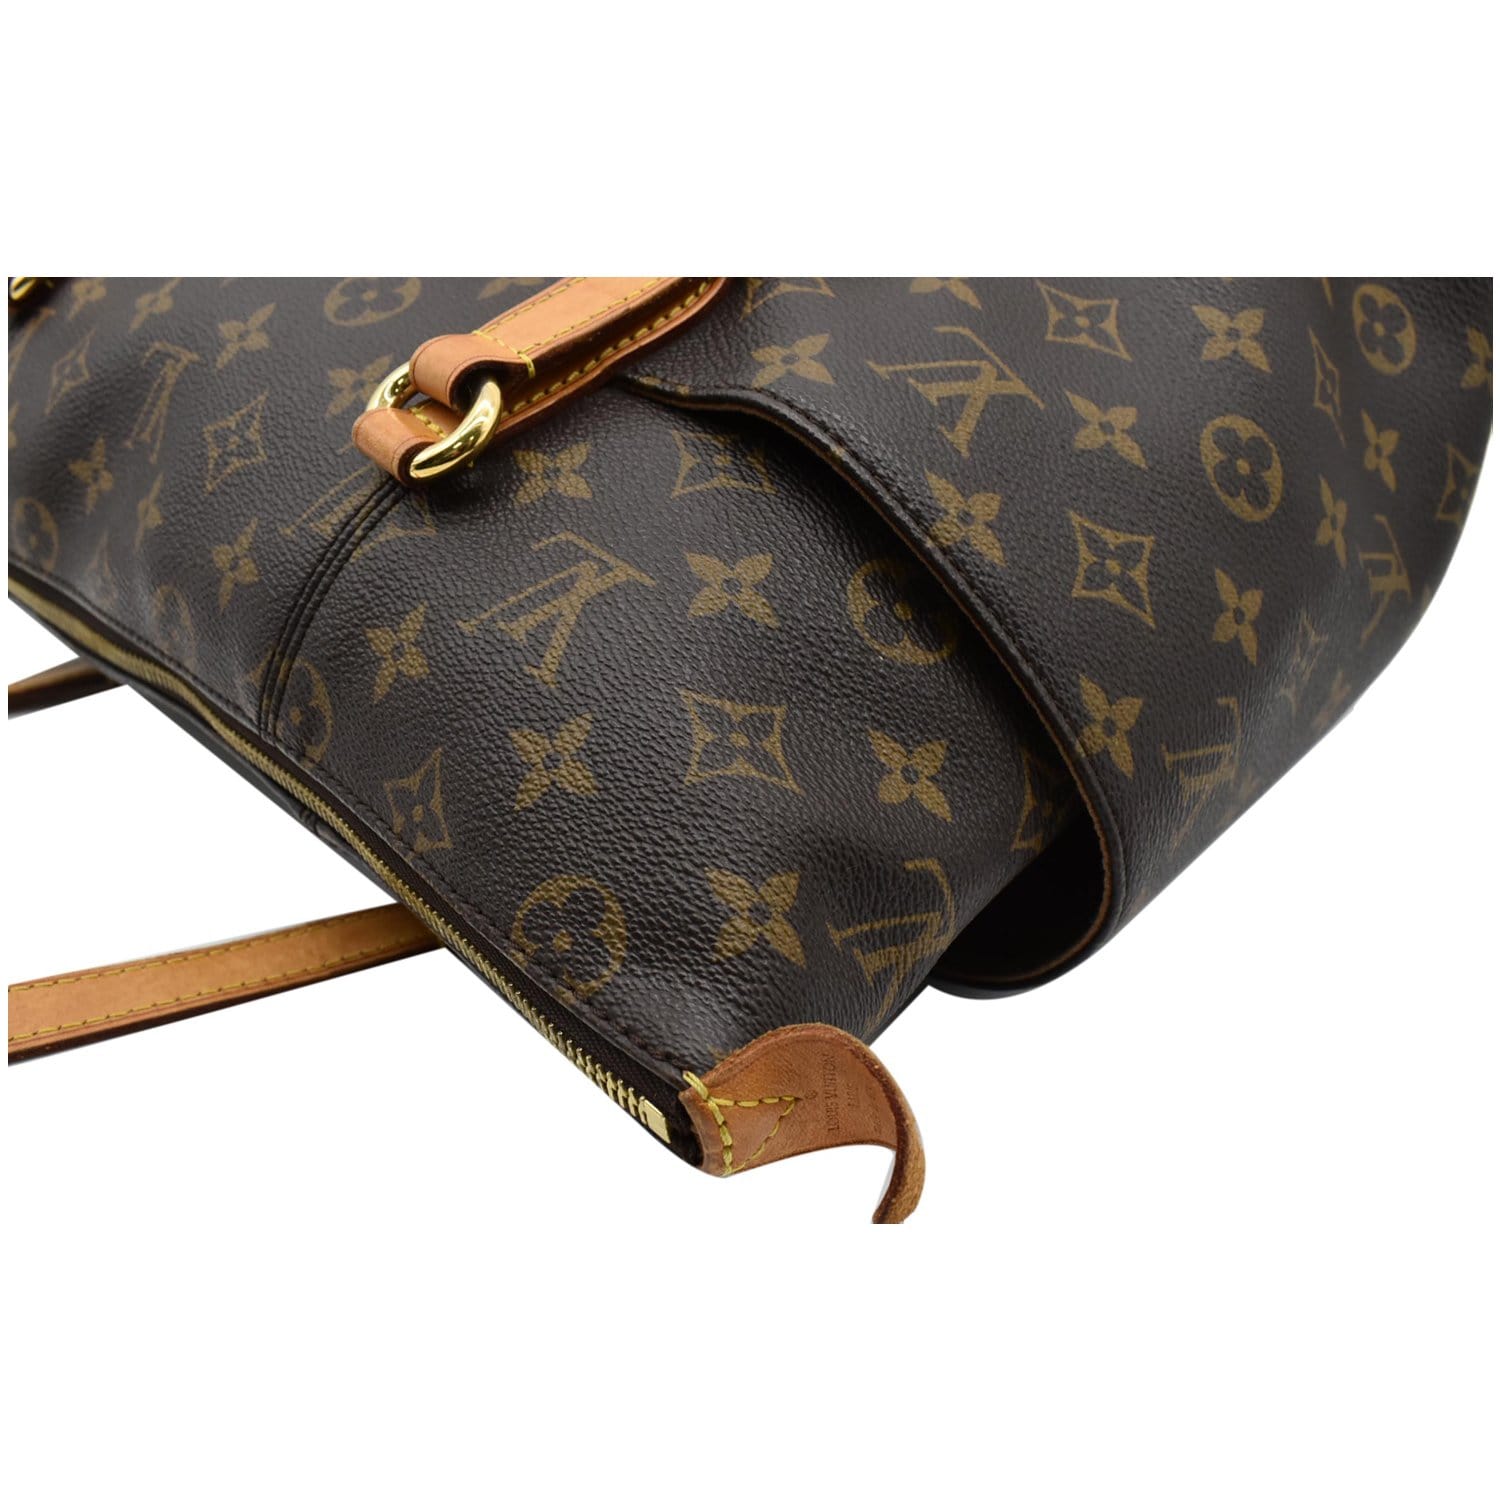 LV Galleria PM 🔥SOLD🔥 🩵date code SD4190 🩵on consignment